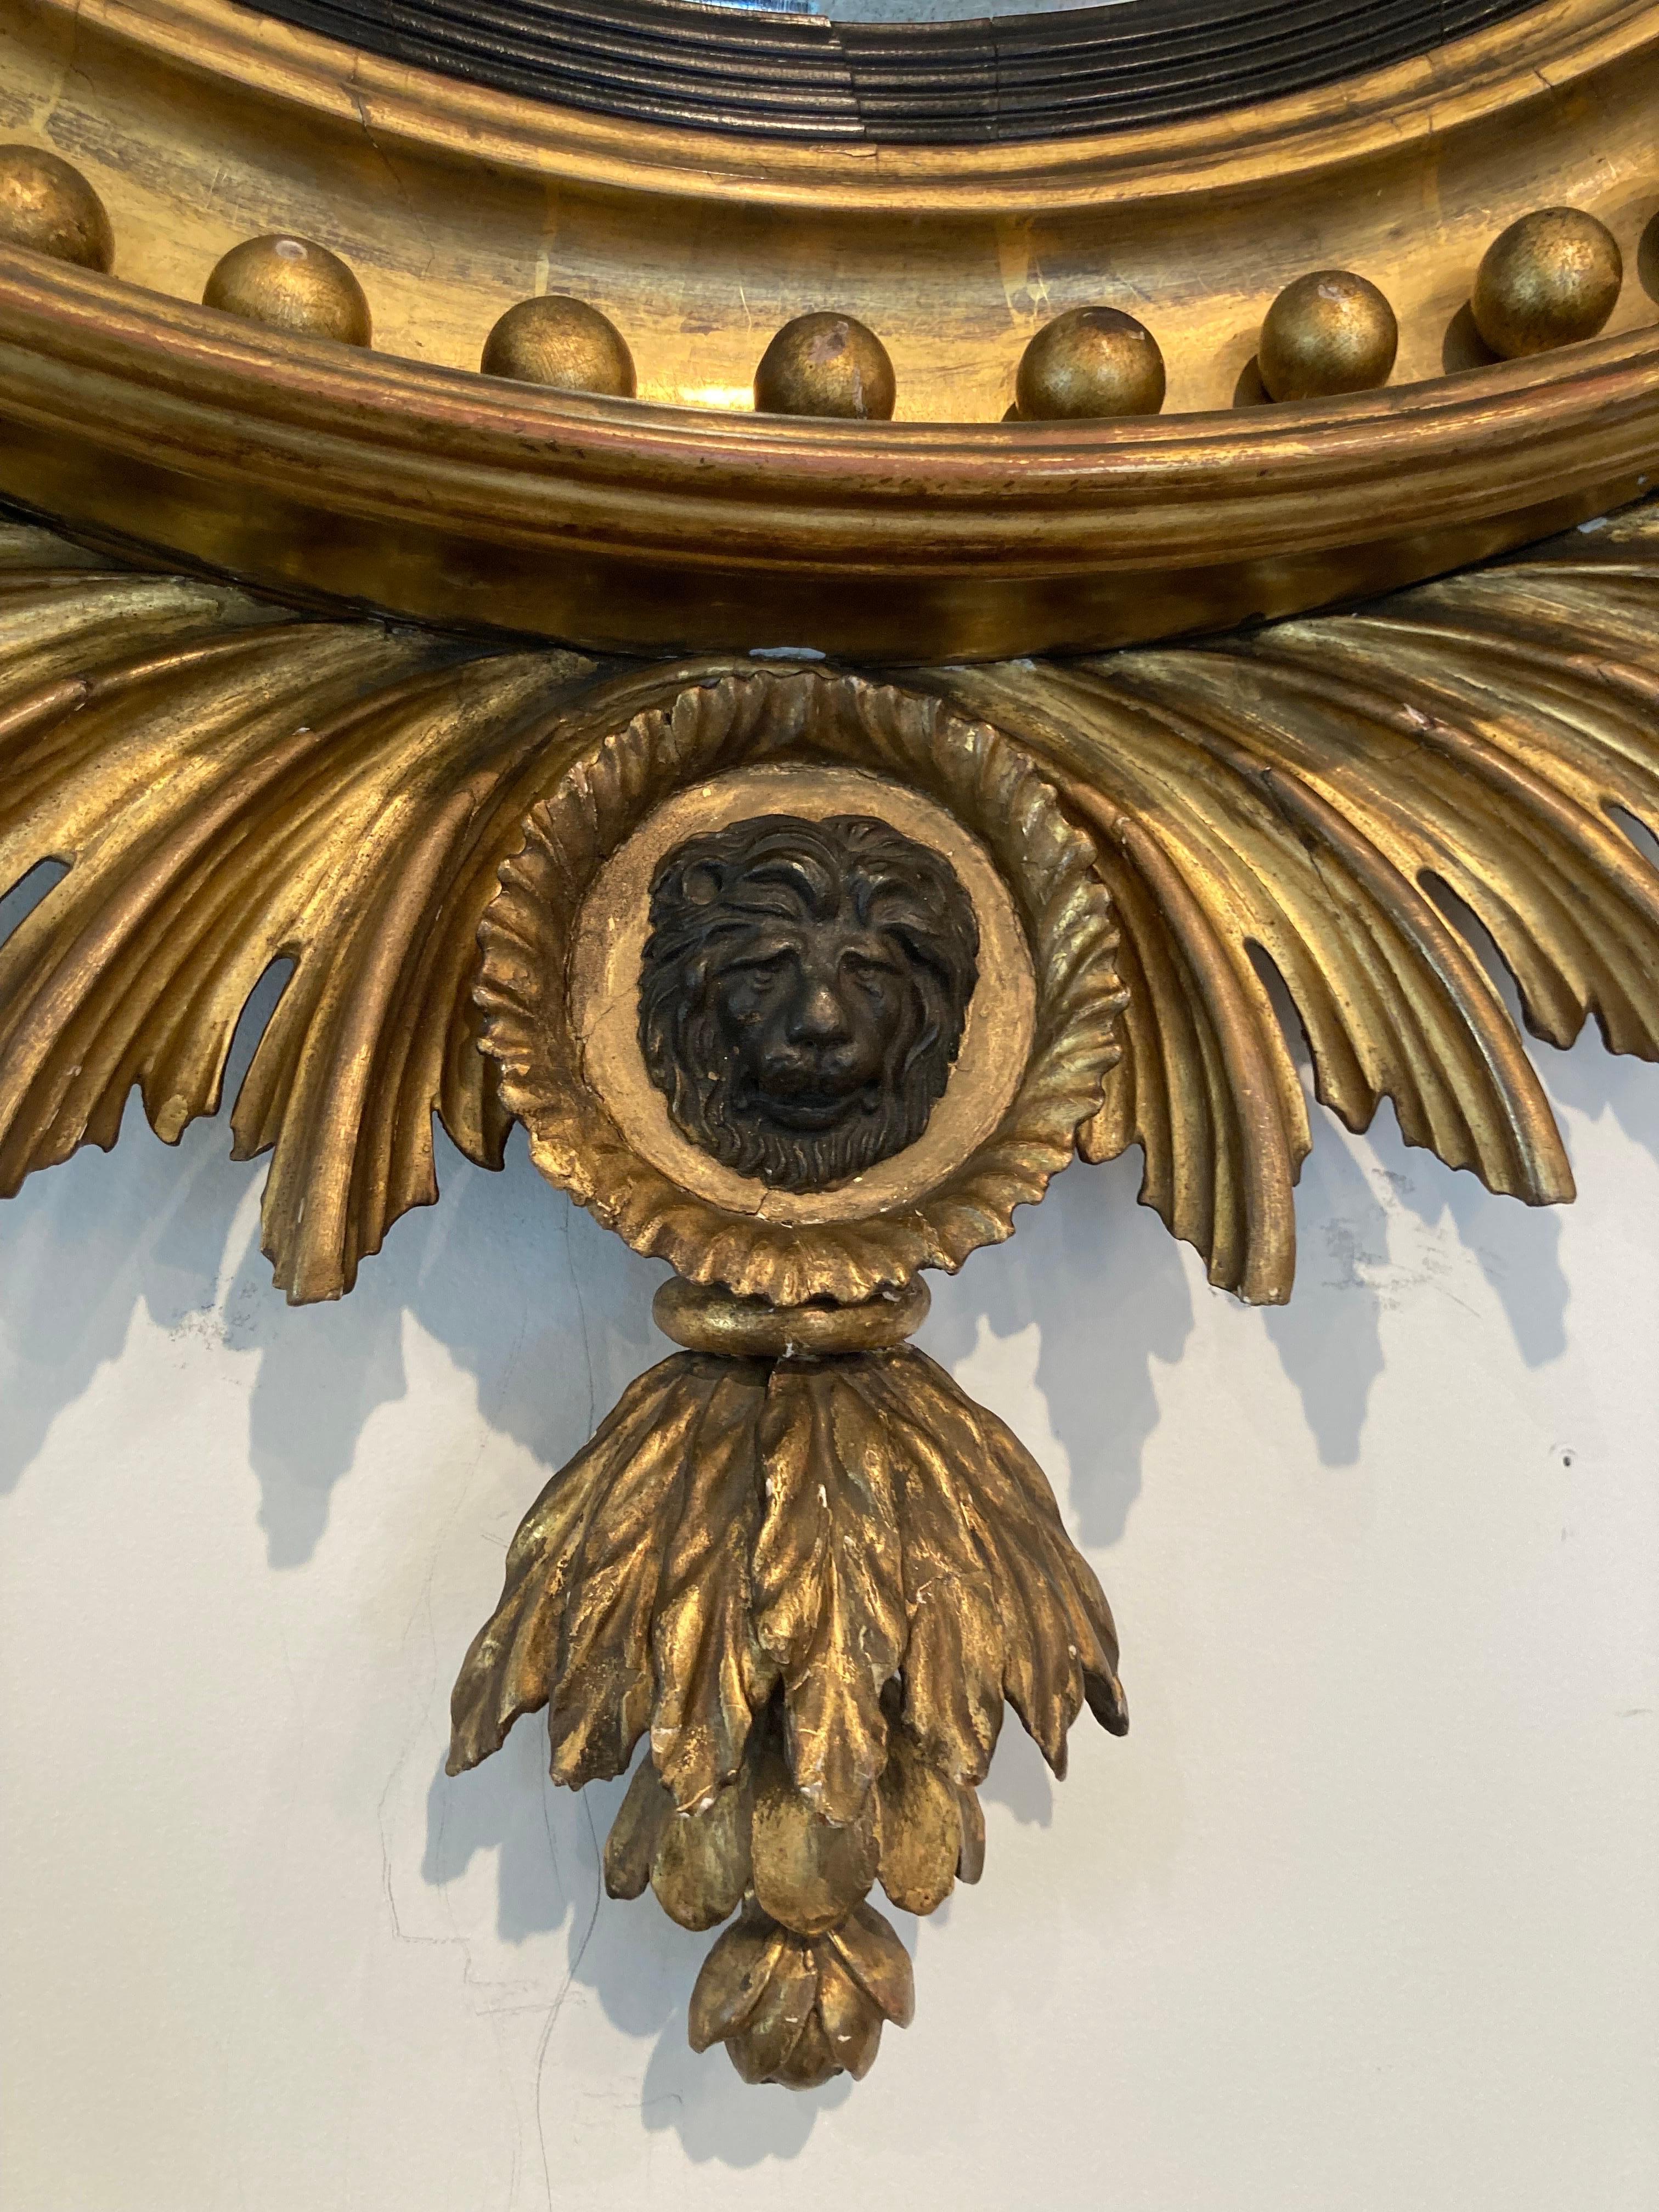 Elegant 19th century convex mirror in a giltwood frame with a black eagle topping. 4 gilt metal candle arms and a black lion face medallion. Federal style.